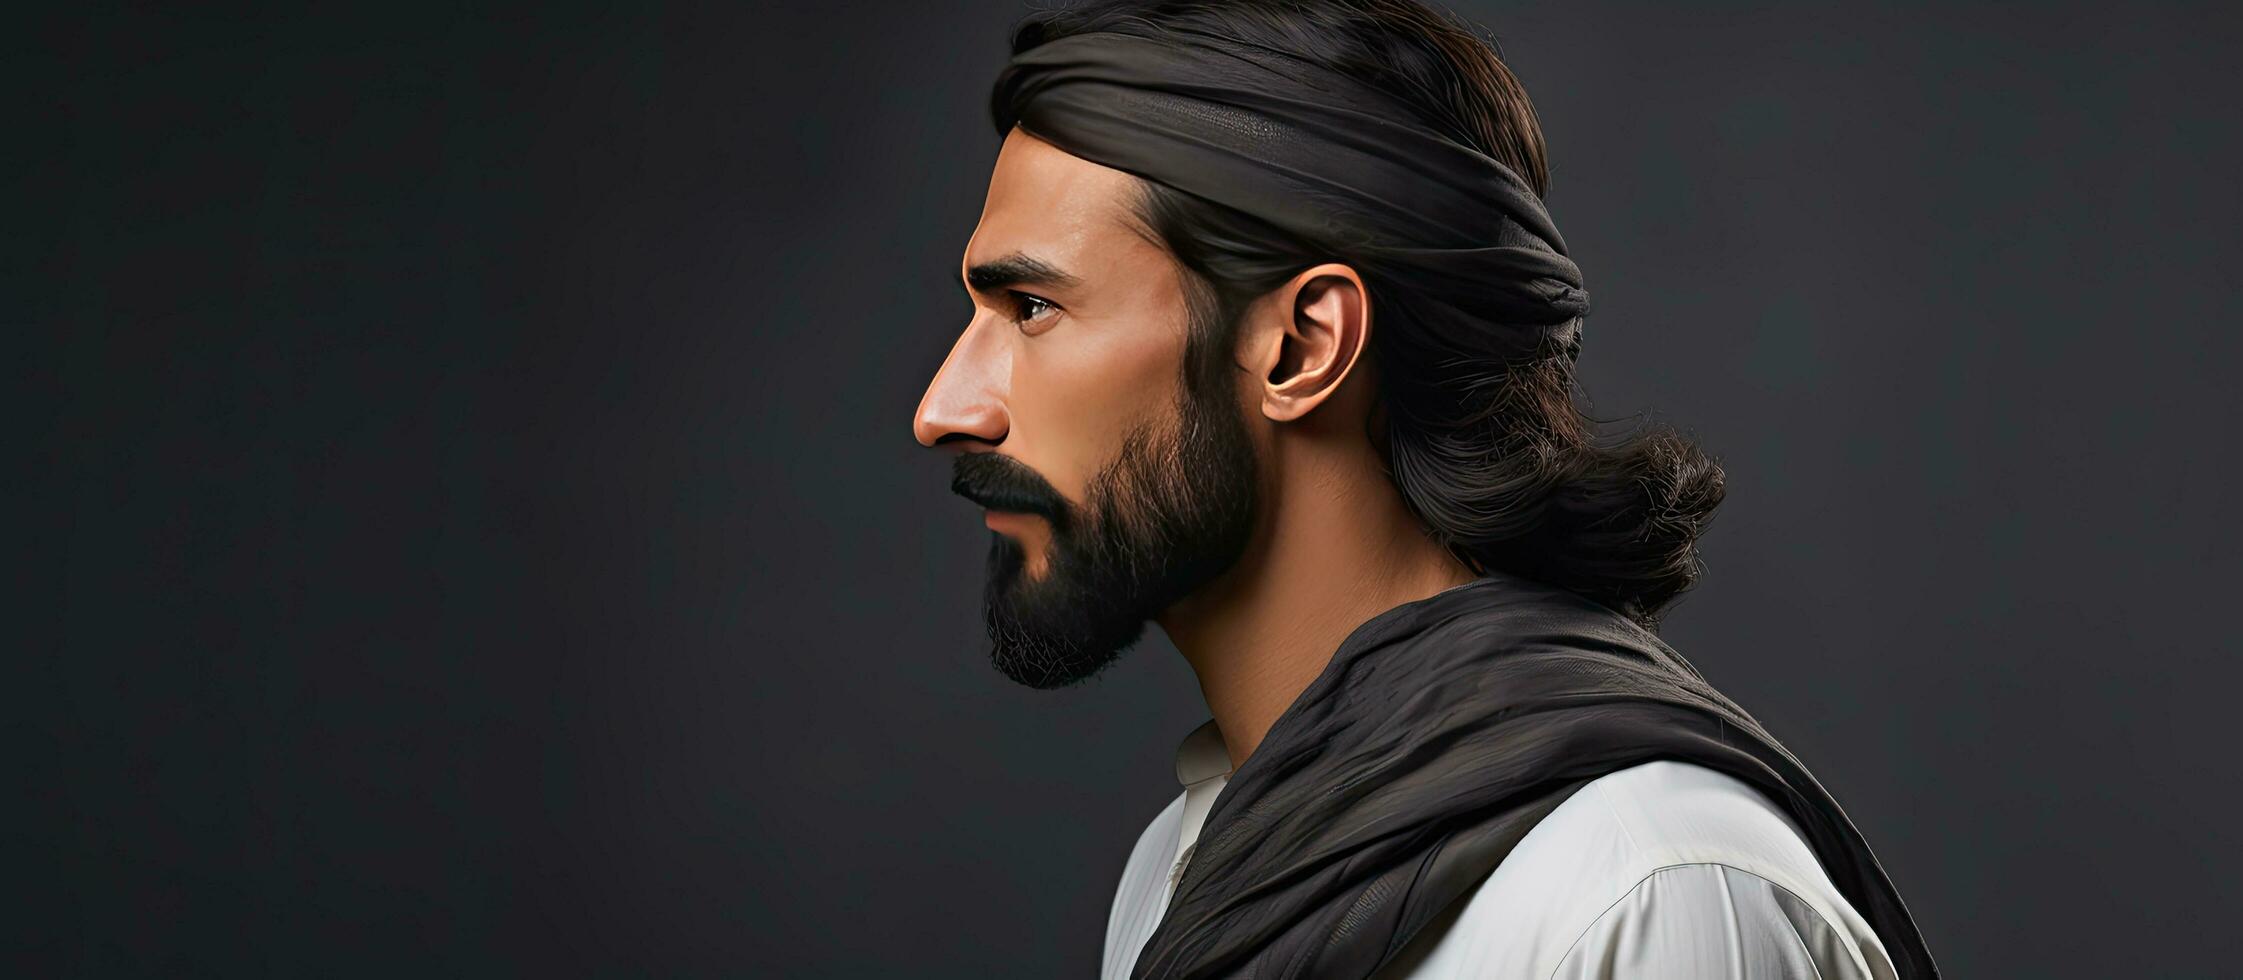 Profile portrait of a young man in traditional Pakistani attire with dark hair mustache and beard against a gray background Horizontal banner with empt photo